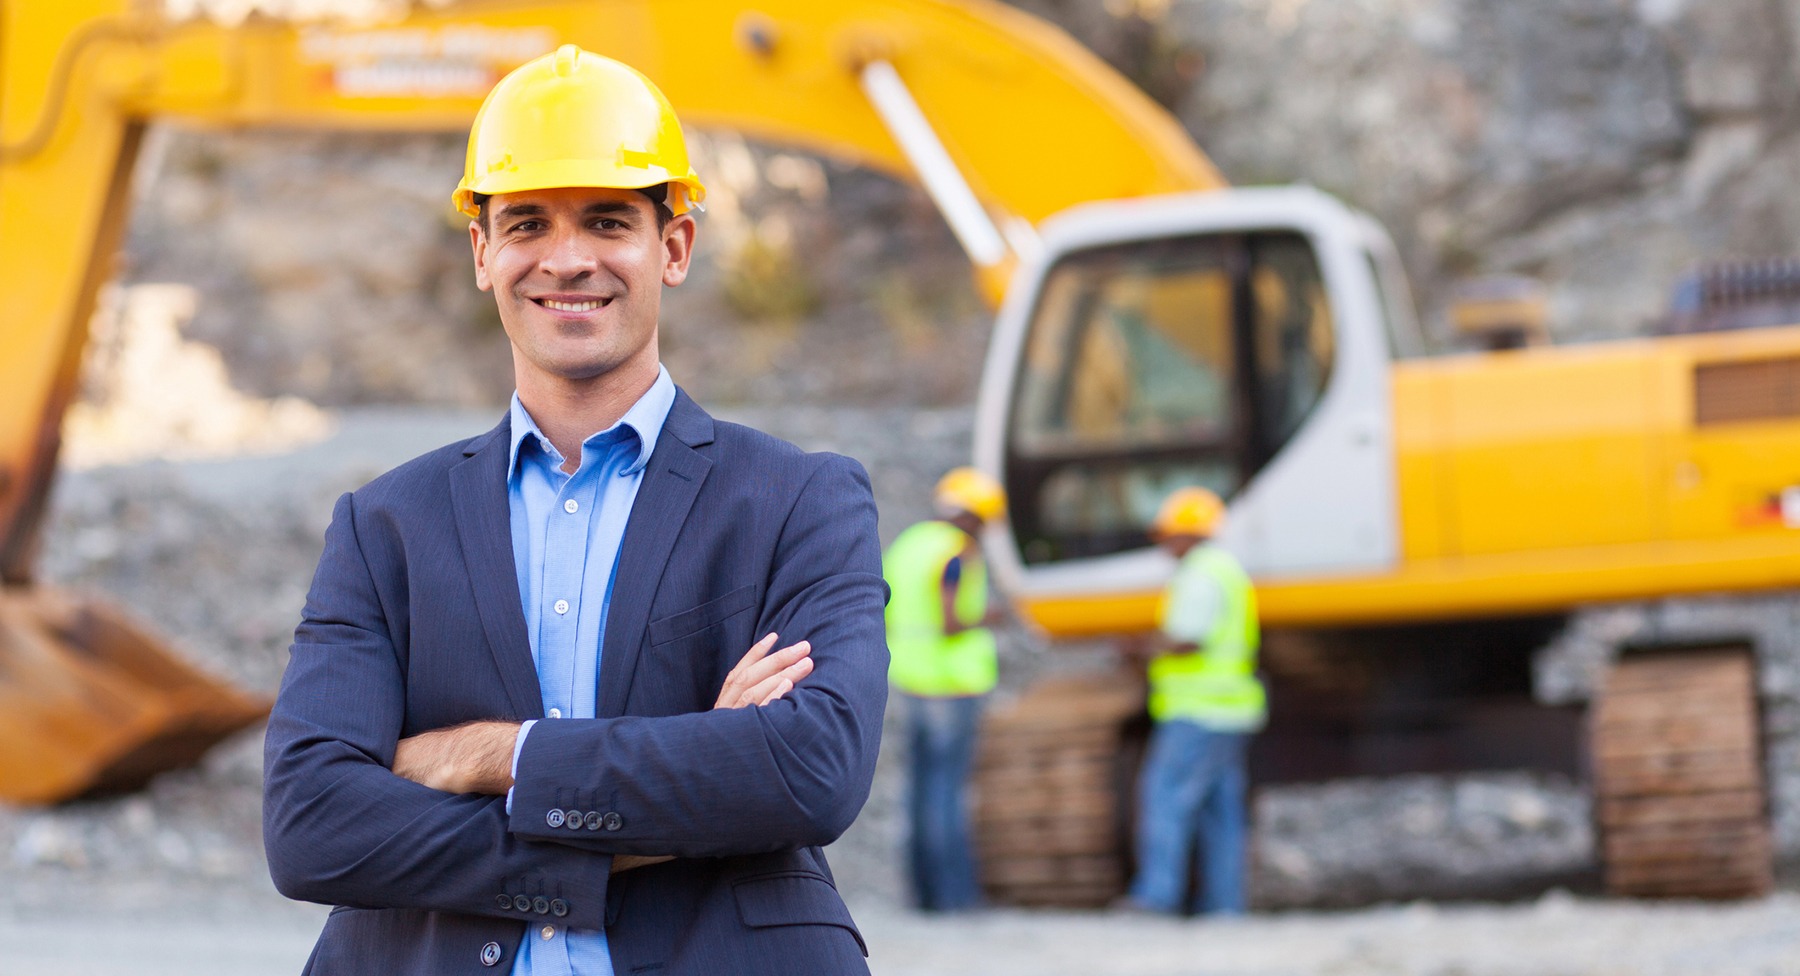 Man in business suit with hard hat standing in front of heavy equipment